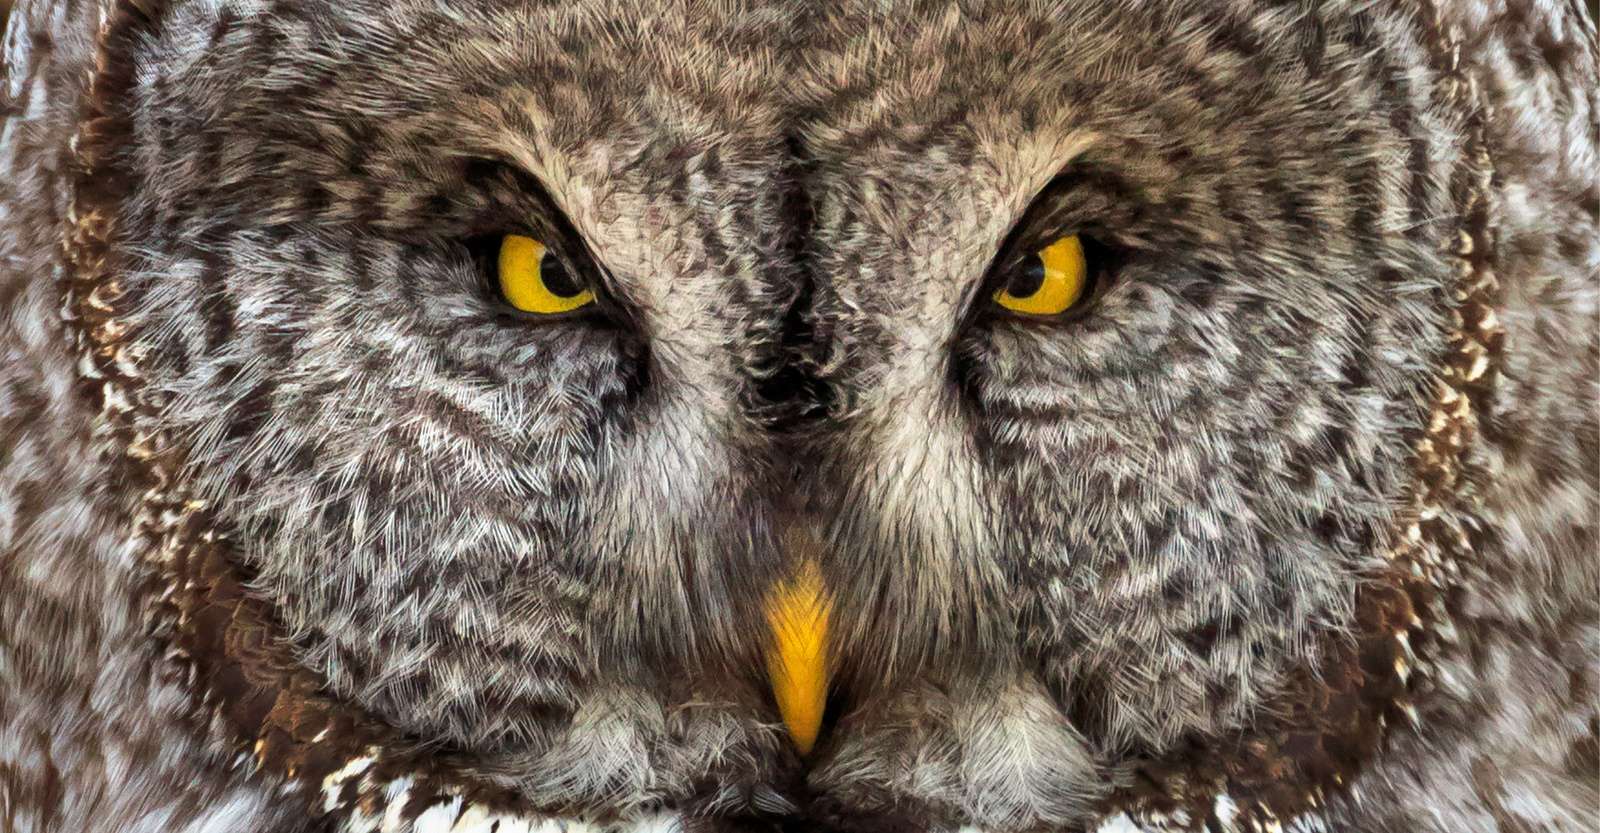 Great gray owl, Yellowstone National Park, Wyoming.